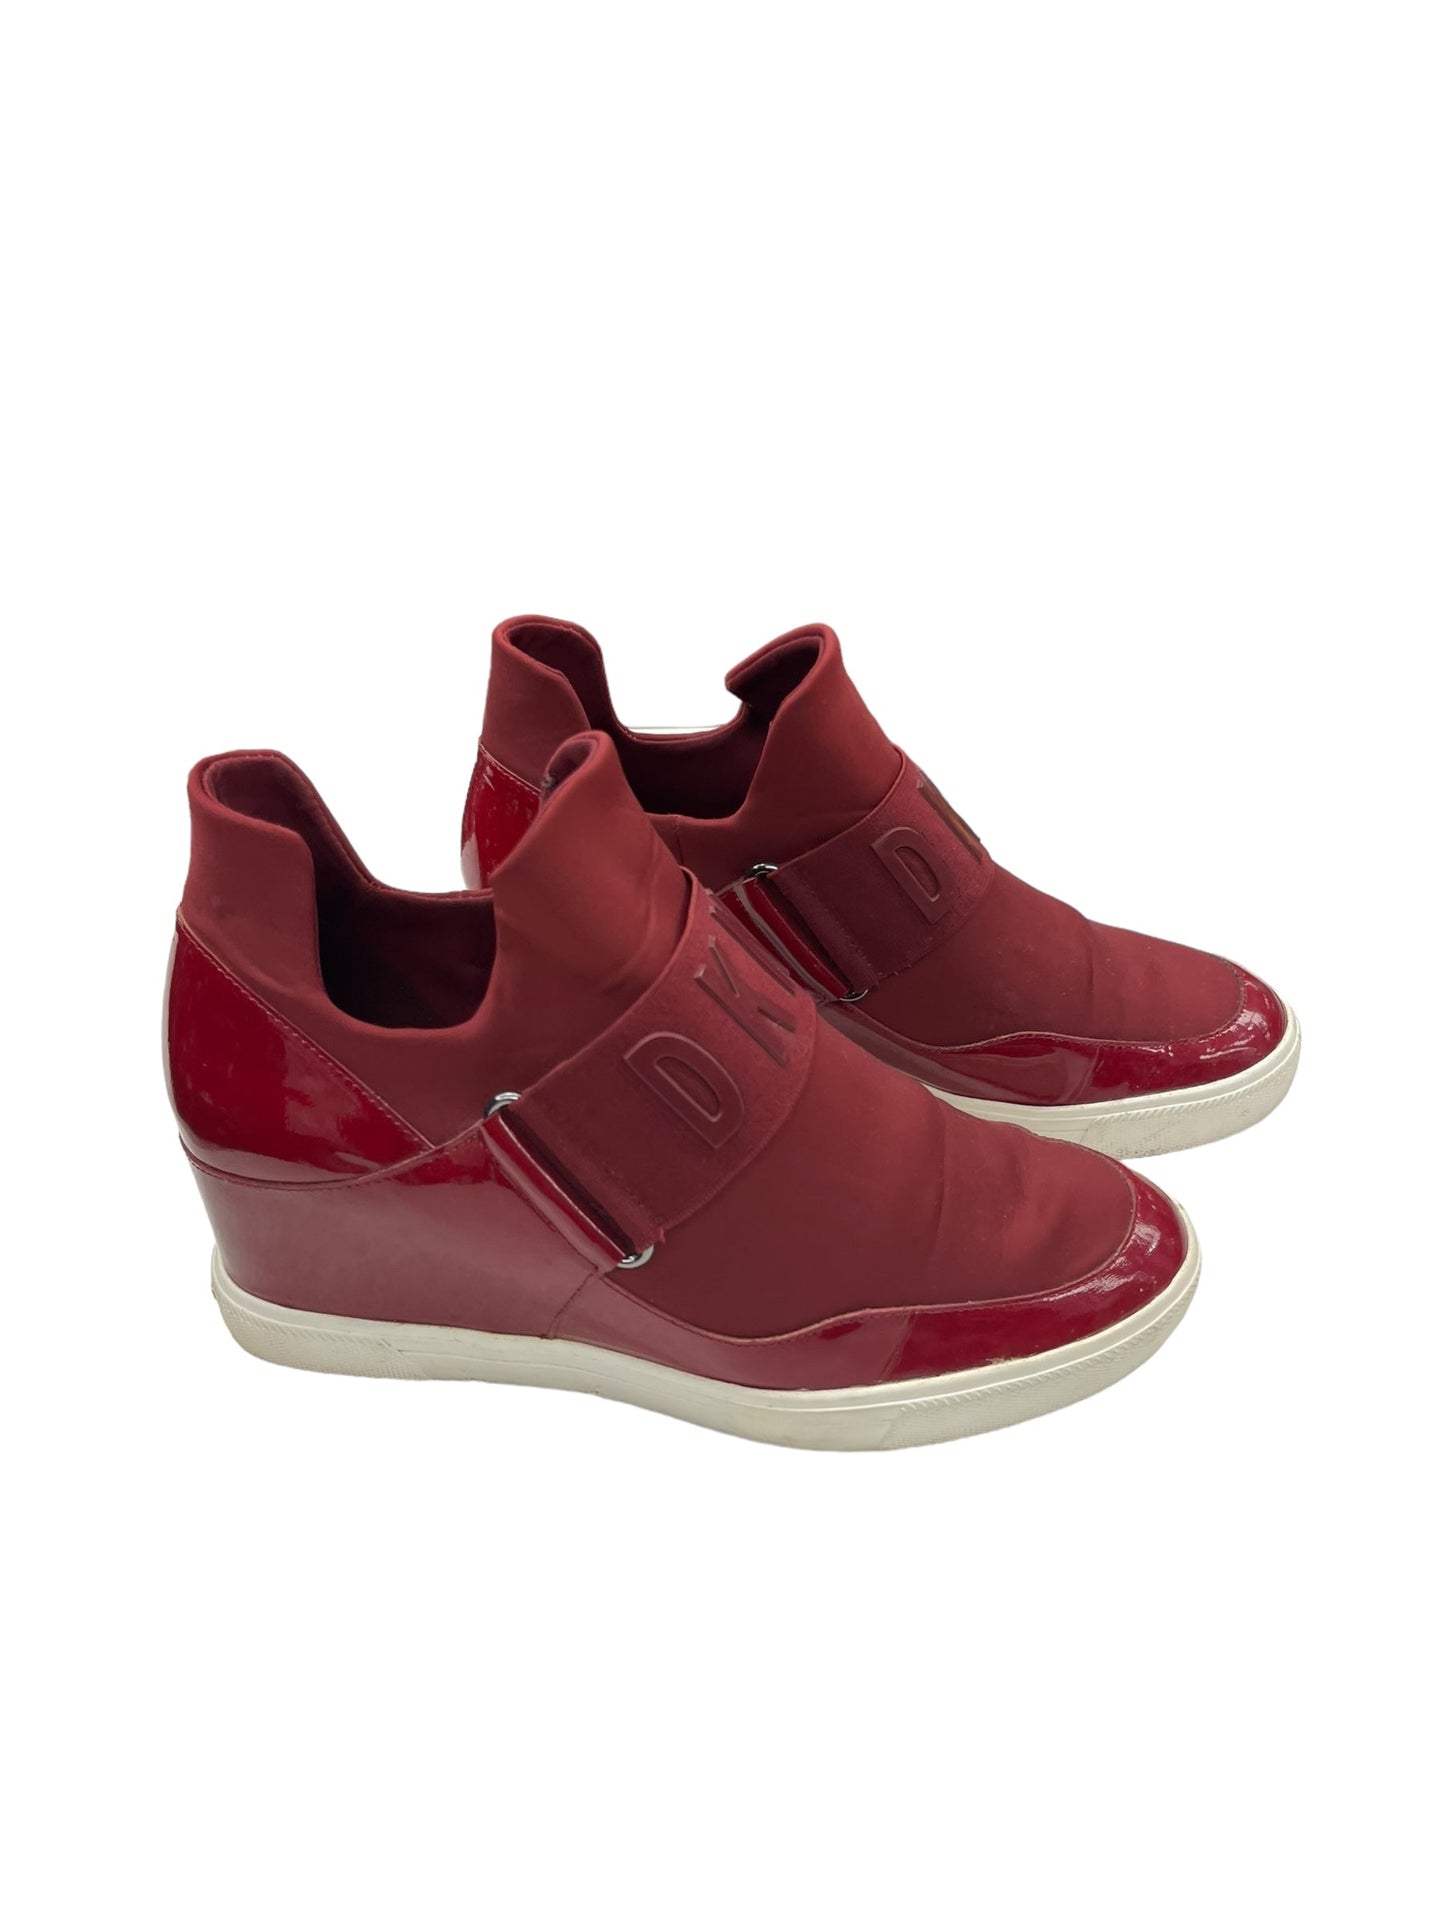 Red Shoes Sneakers Dkny, Size 10